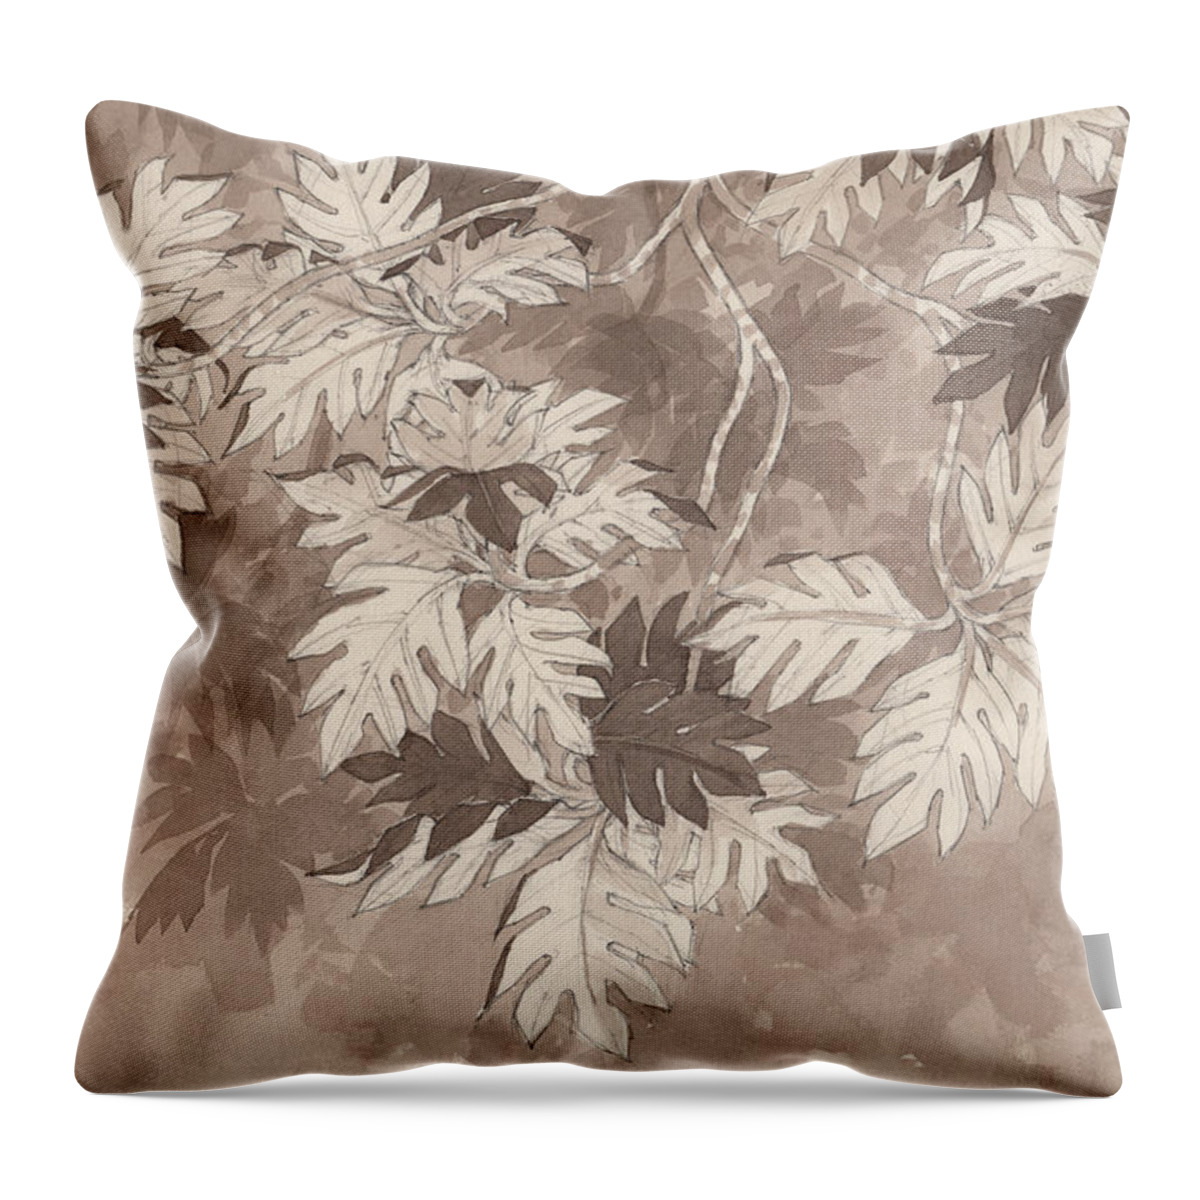 Landscape Throw Pillow featuring the painting Breadfruit Tree by Judith Kunzle